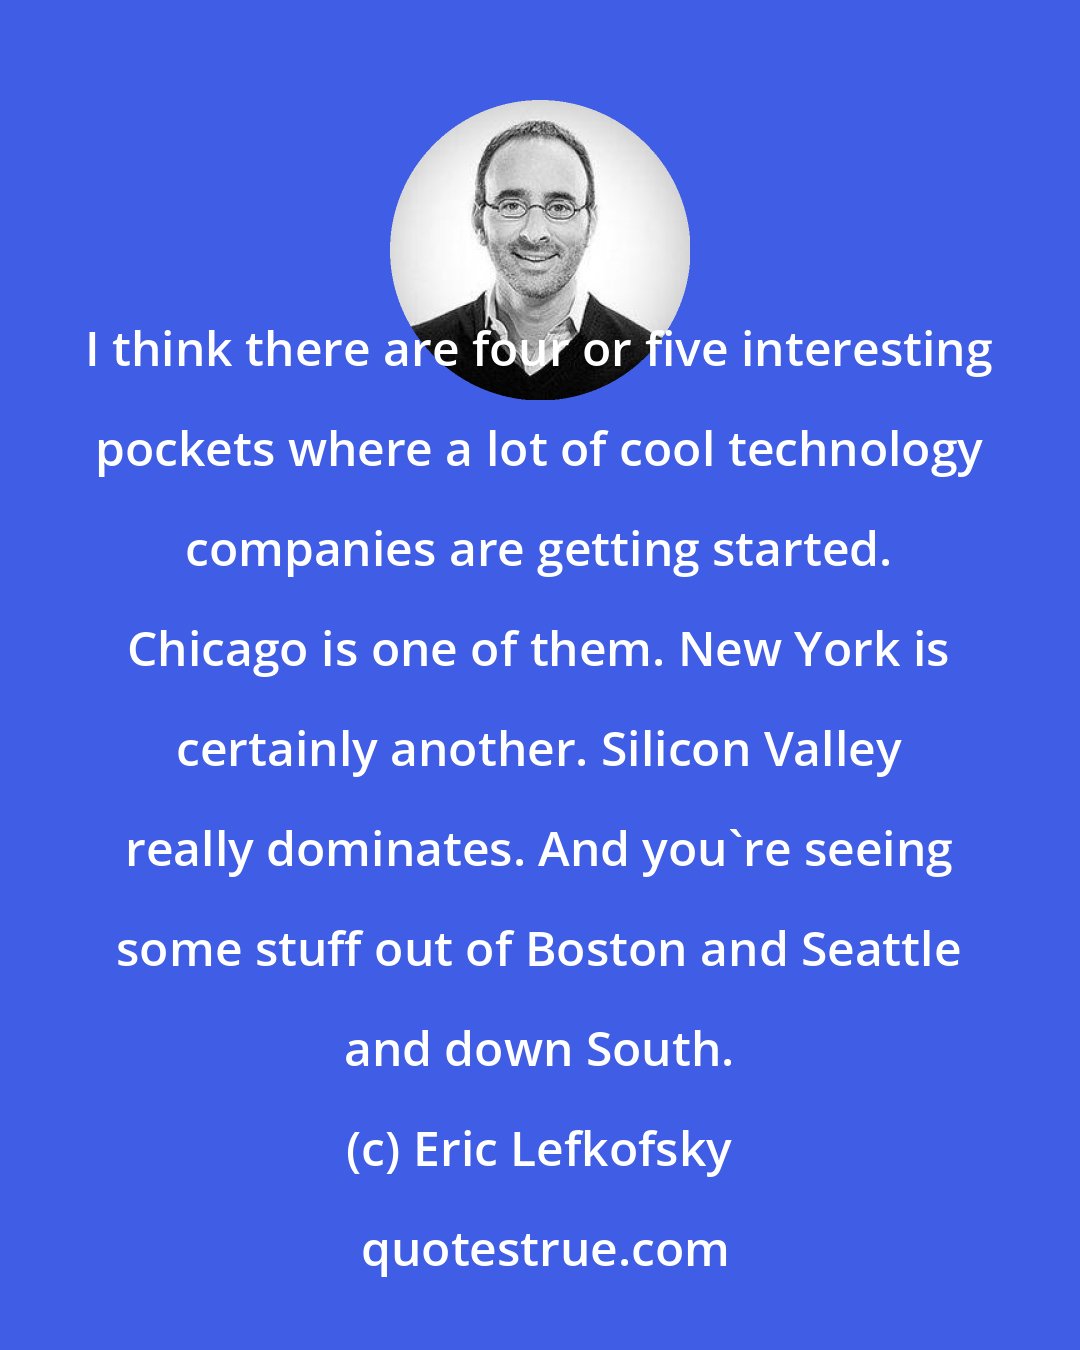 Eric Lefkofsky: I think there are four or five interesting pockets where a lot of cool technology companies are getting started. Chicago is one of them. New York is certainly another. Silicon Valley really dominates. And you're seeing some stuff out of Boston and Seattle and down South.